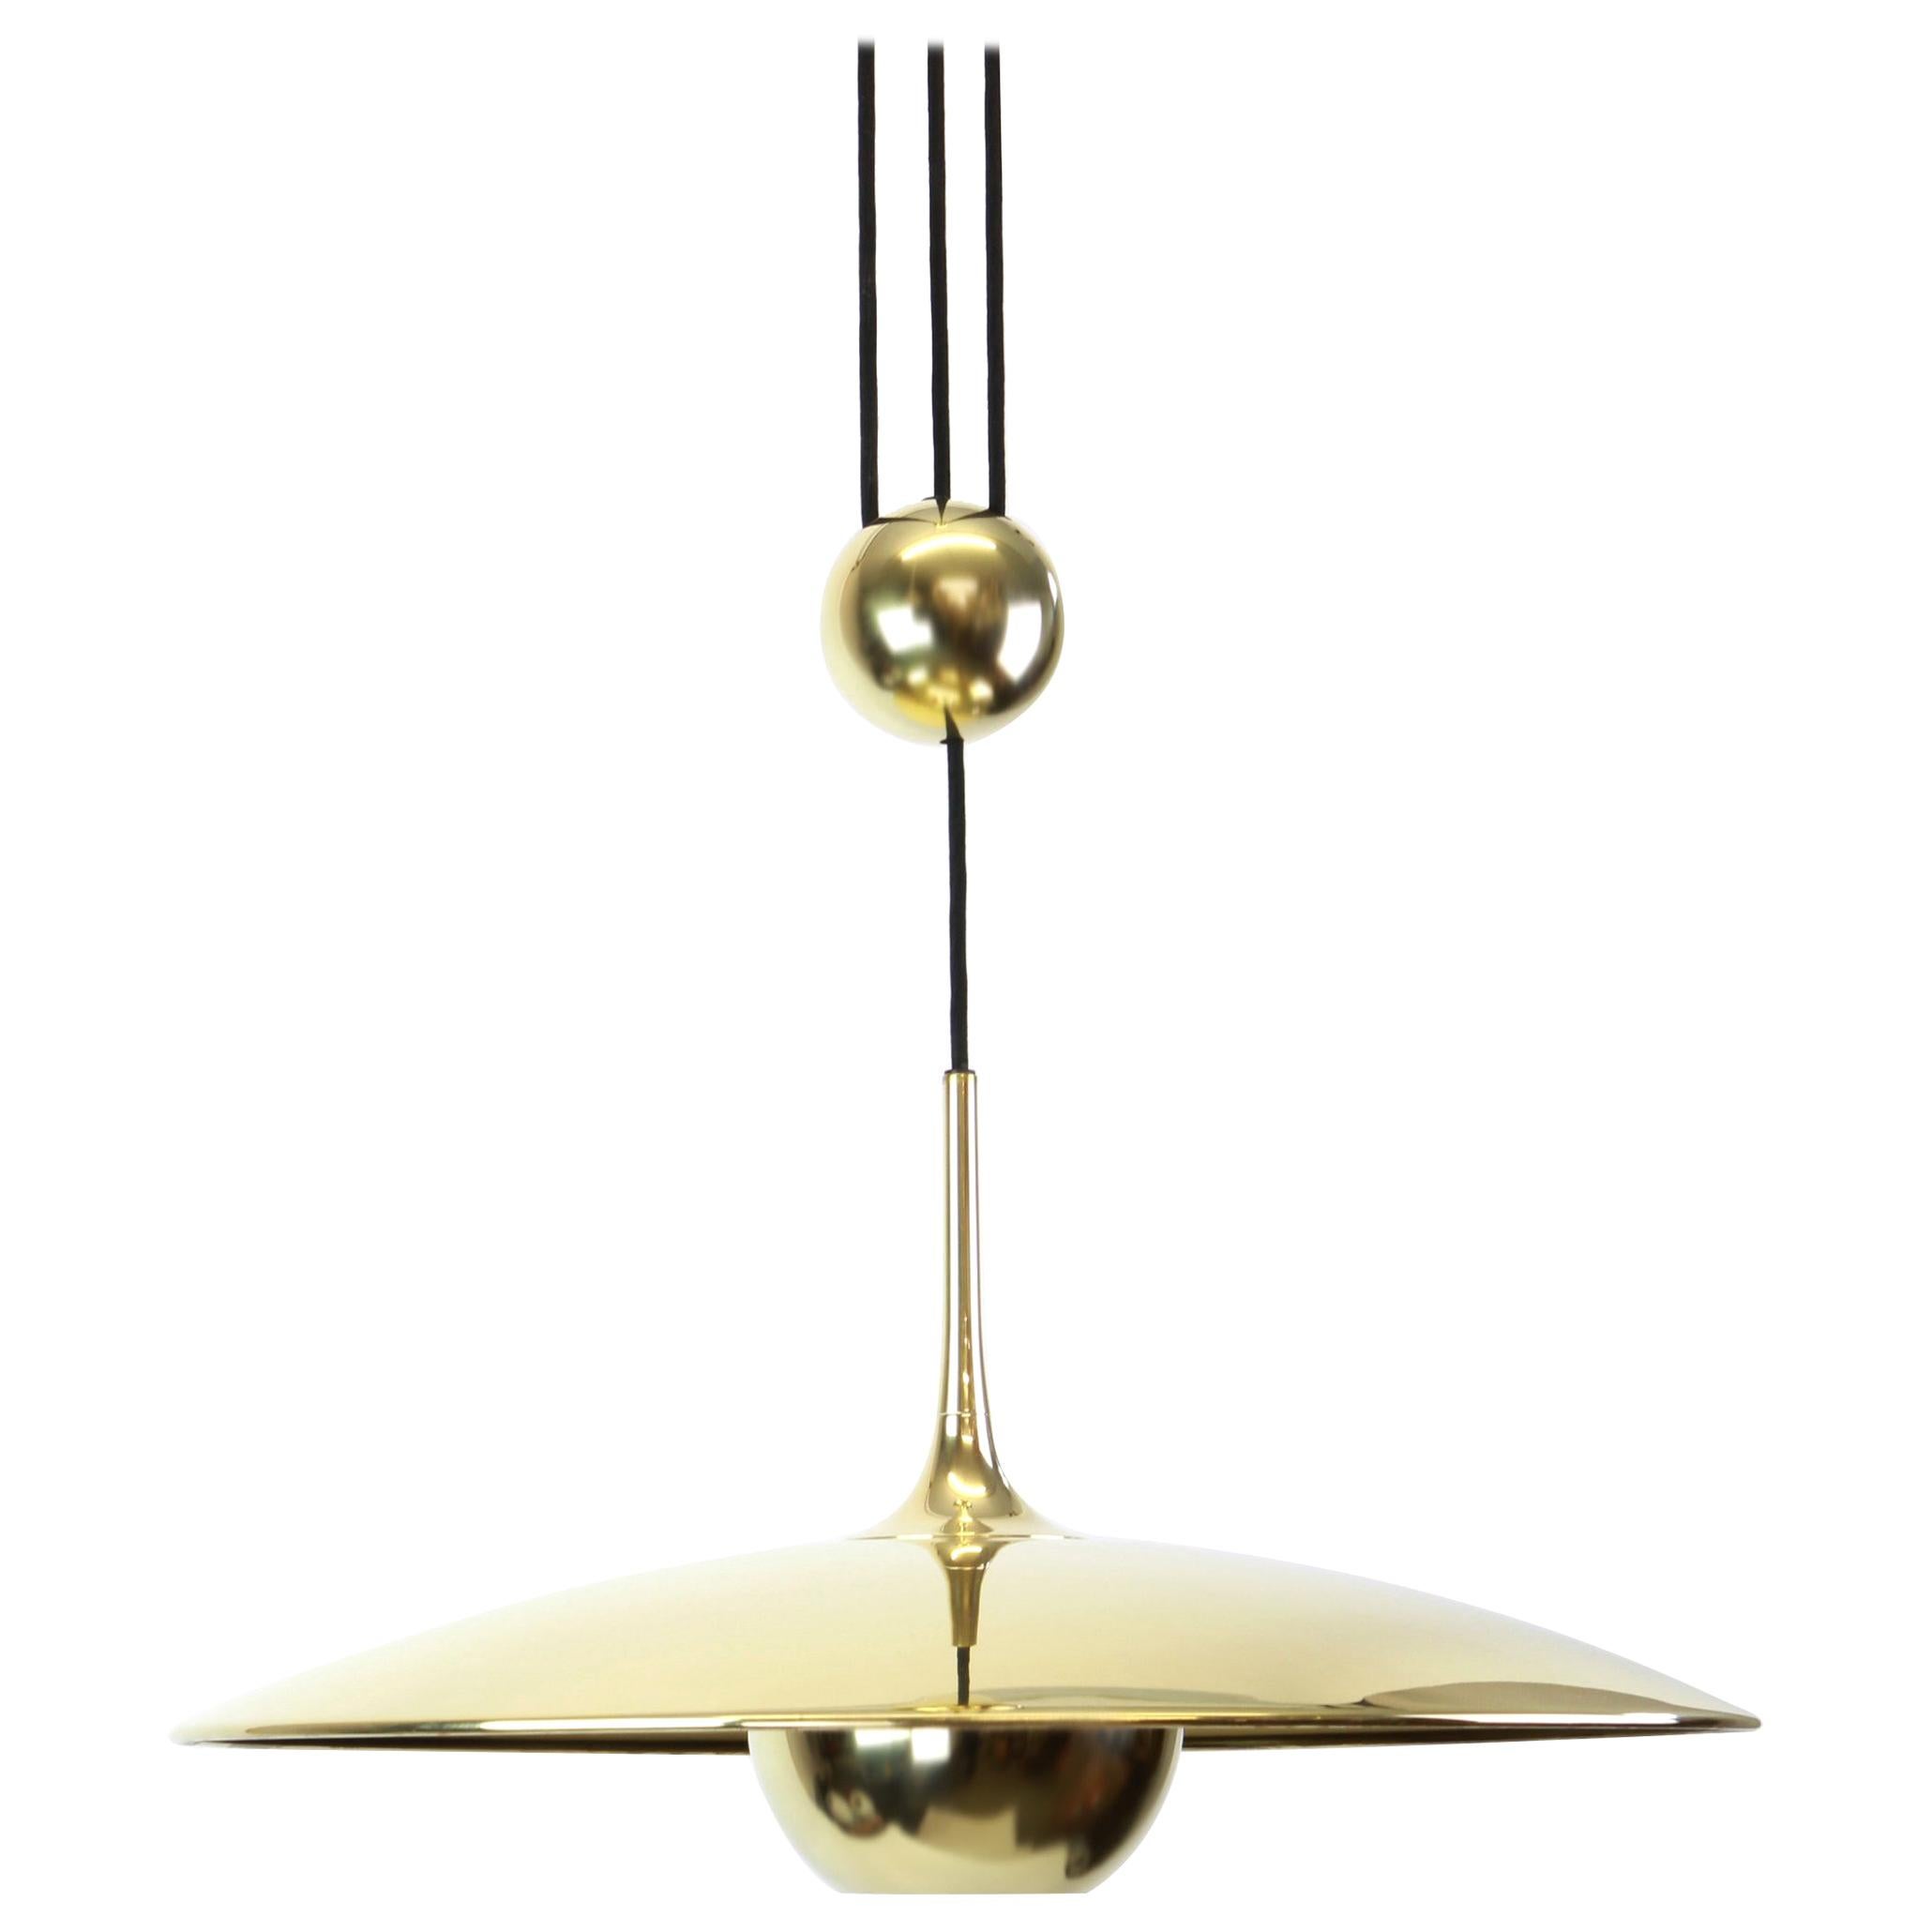 Large Adjustable Brass Counterweight Pendant Light by Florian Schulz, Germany